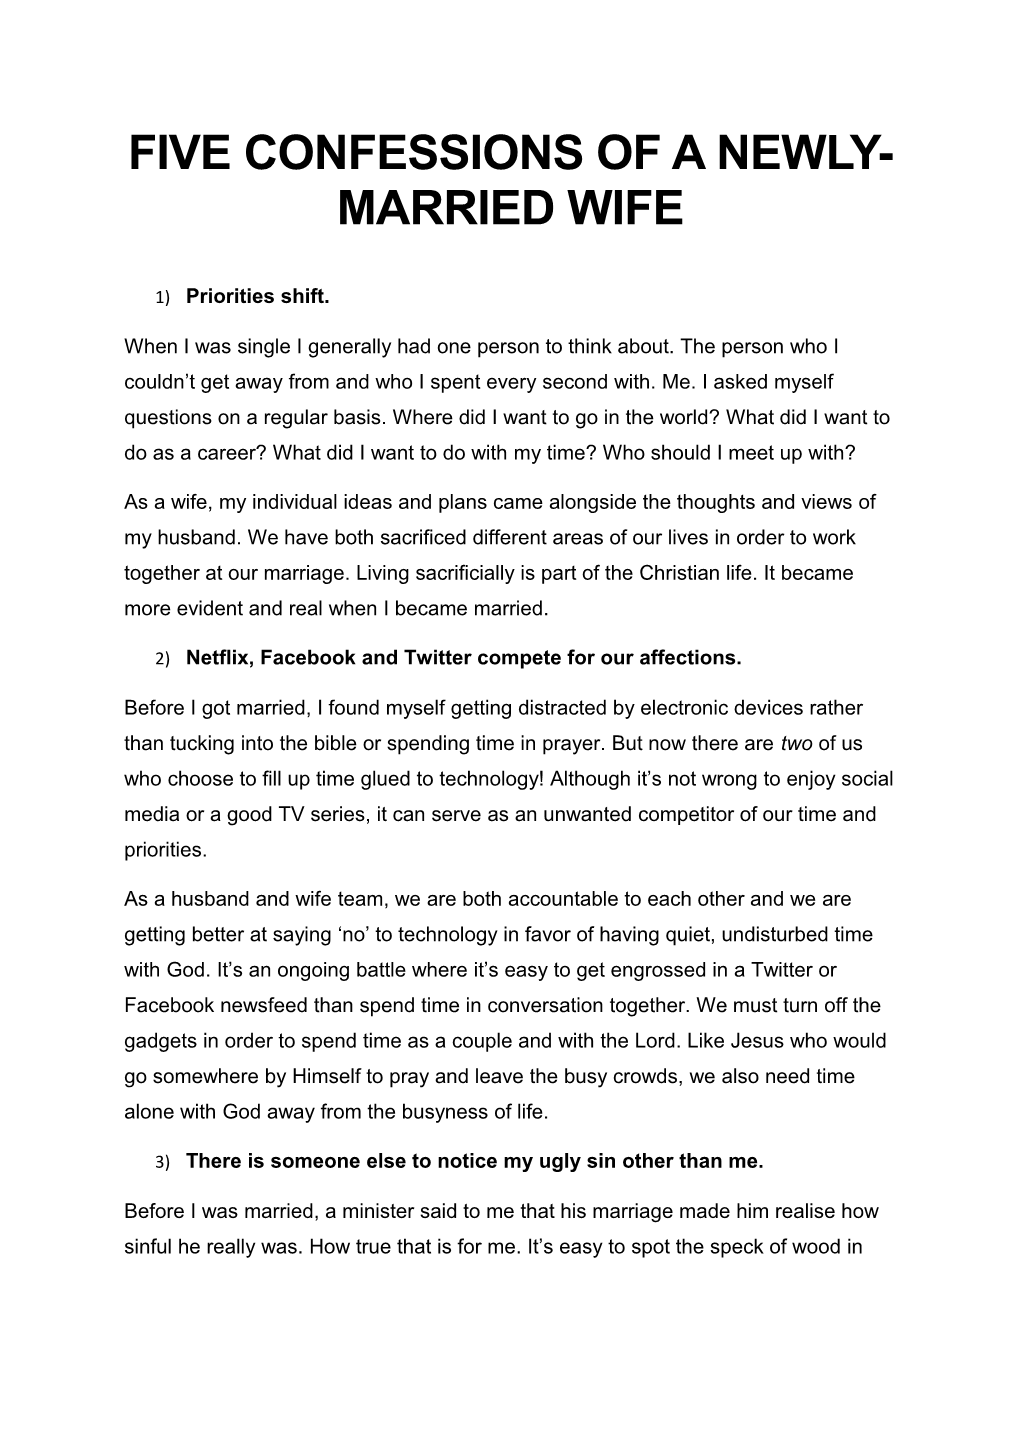 Five Confessions of a Newly-Married Wife